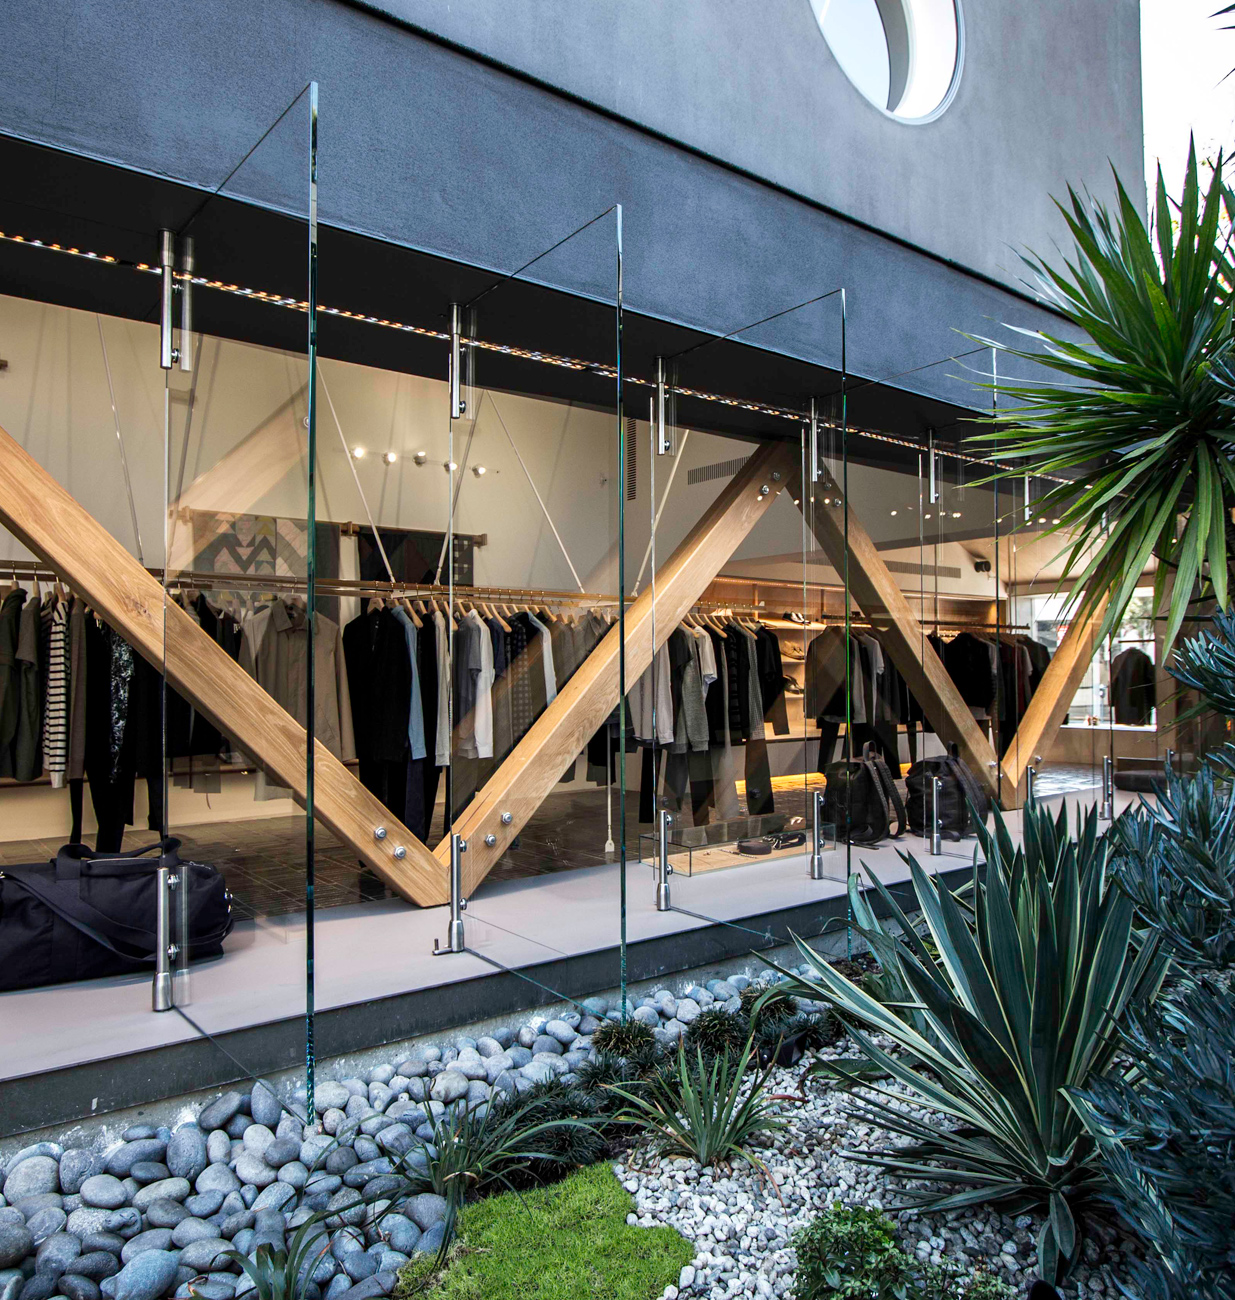 Accoya wood facades used for A.P.C Clothing Store - LA